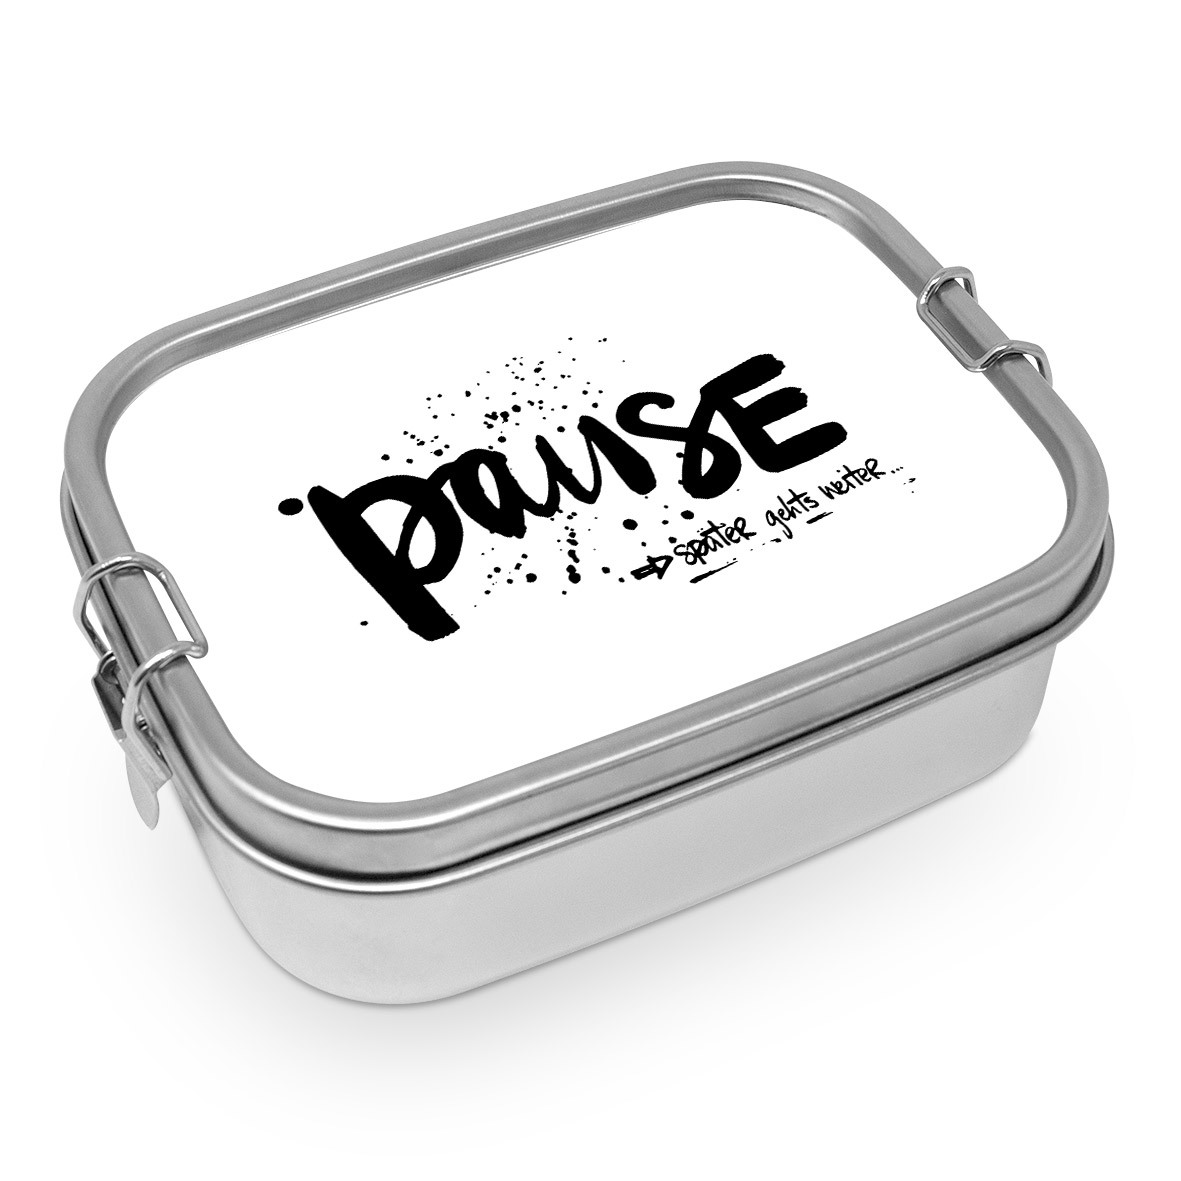 Pause Steel Lunch Box